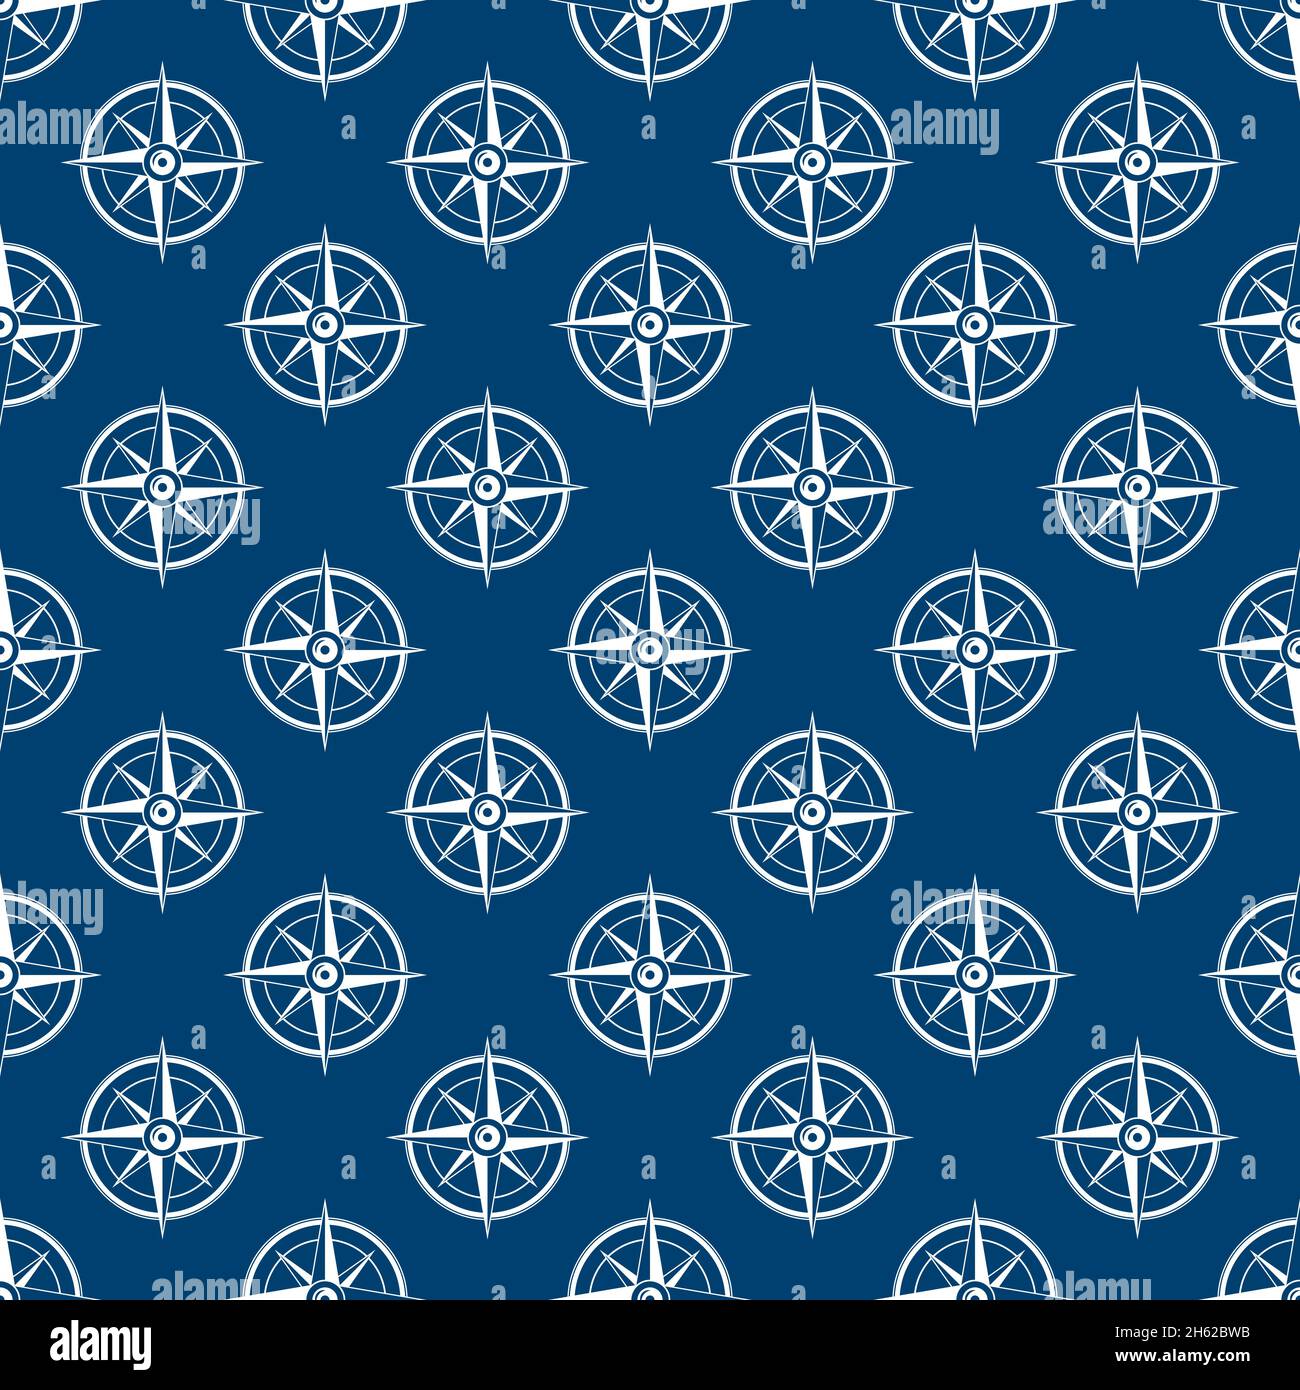 Nautical seamless pattern with compass on blue background. Ship and boat steering wheel ornament. Marine wallpaper with rudder. Summer vector flat ill Stock Vector